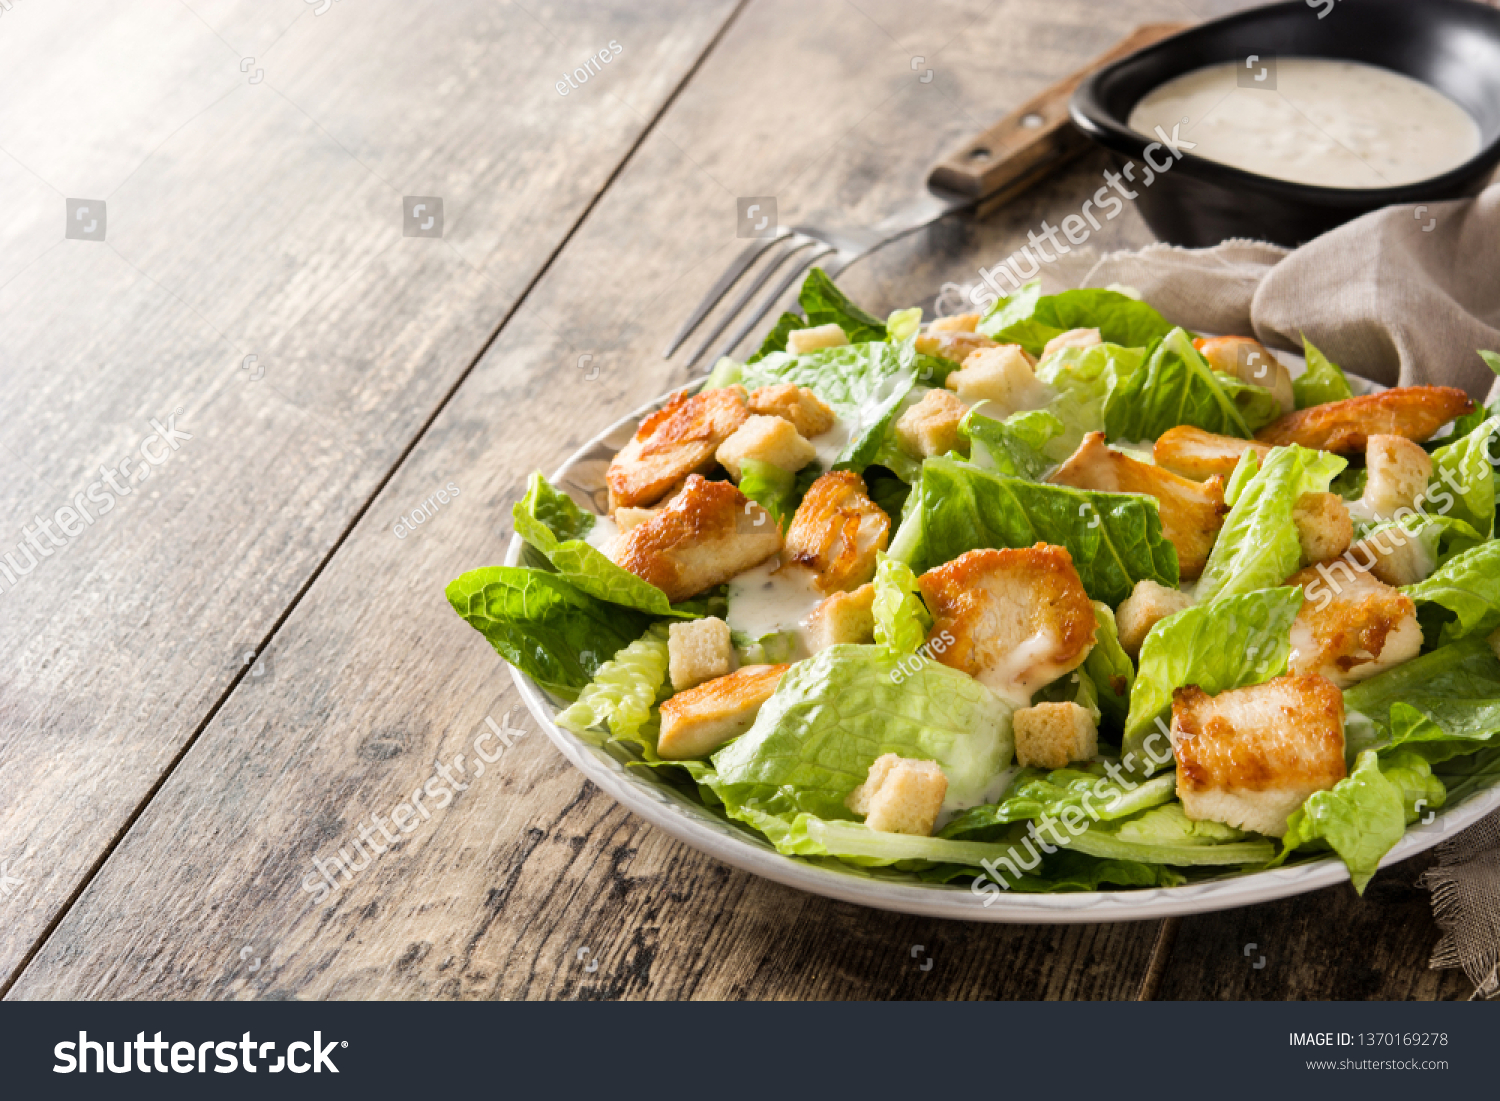 Caesar salad with lettuce,chicken and croutons on wooden table. Copyspace #1370169278